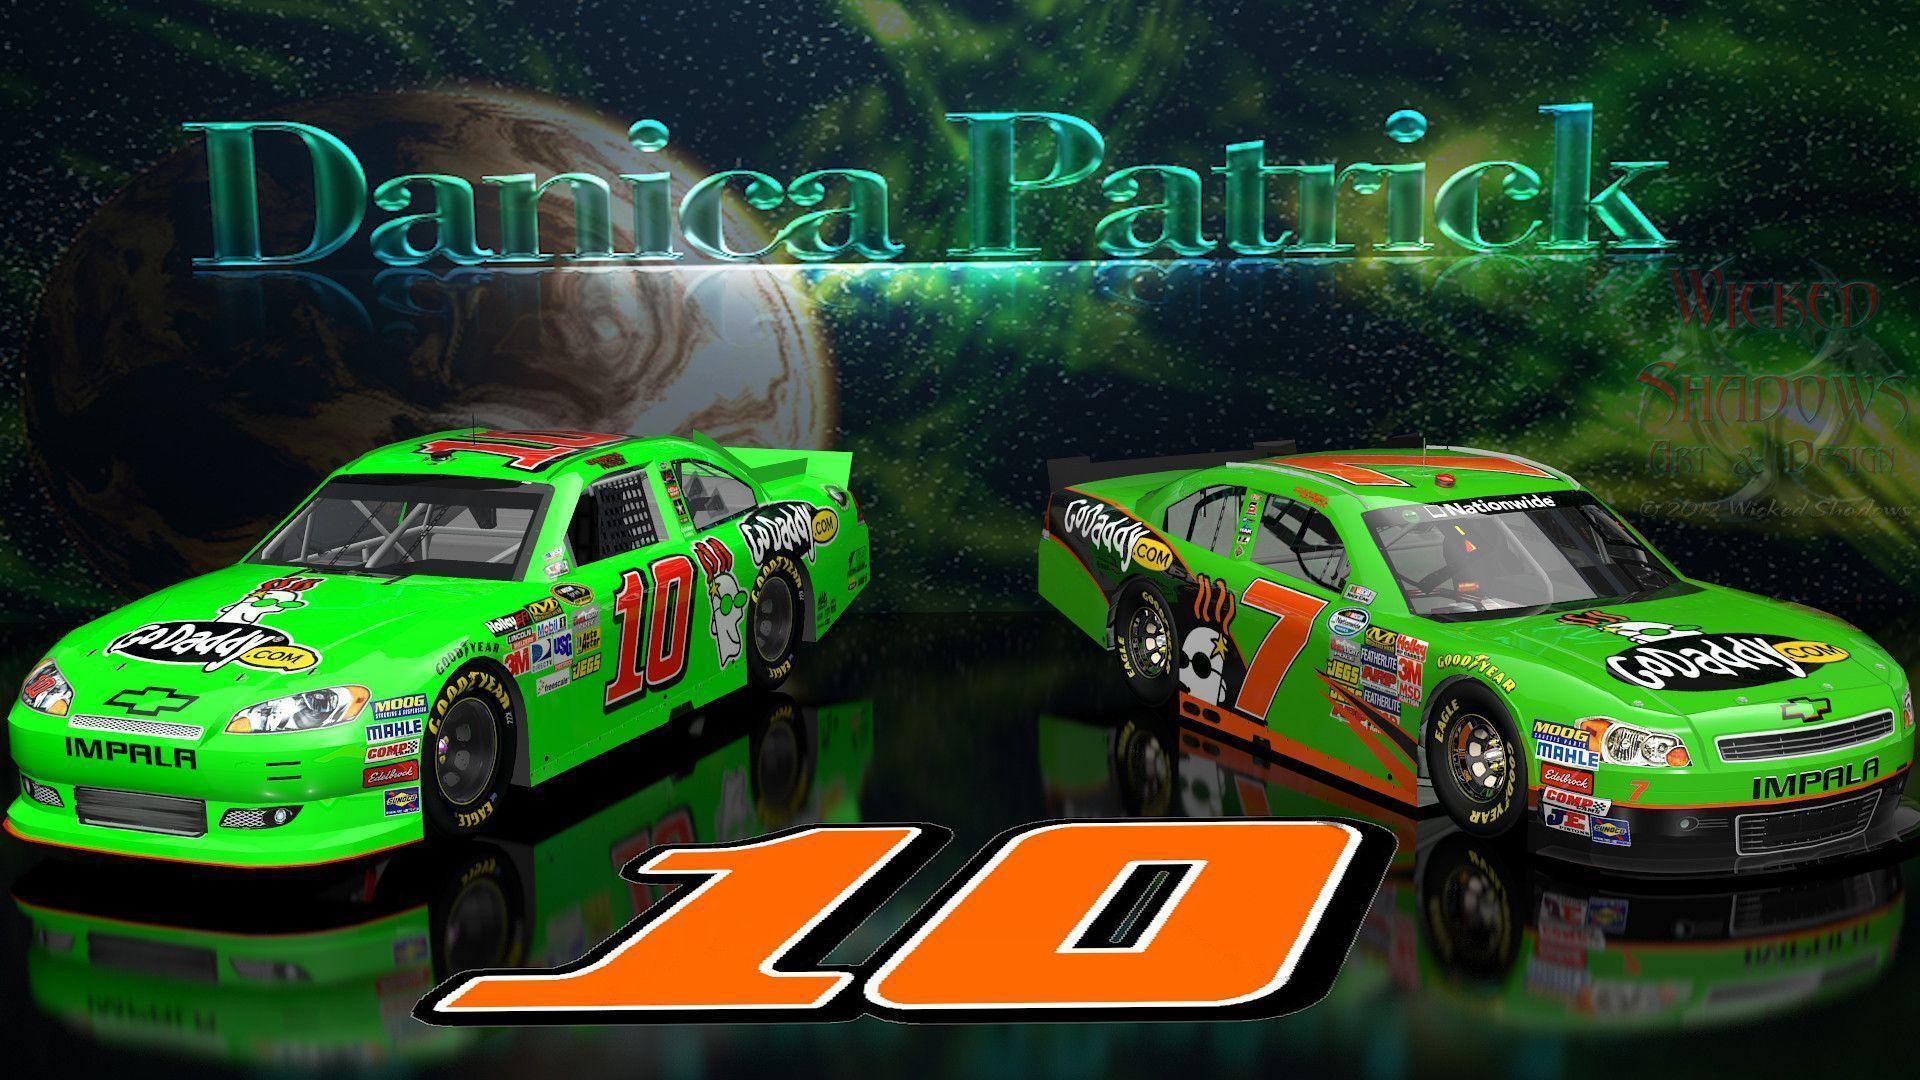 Danica Patrick NNS And Cup Go Daddy Cars wallpaper 16x9